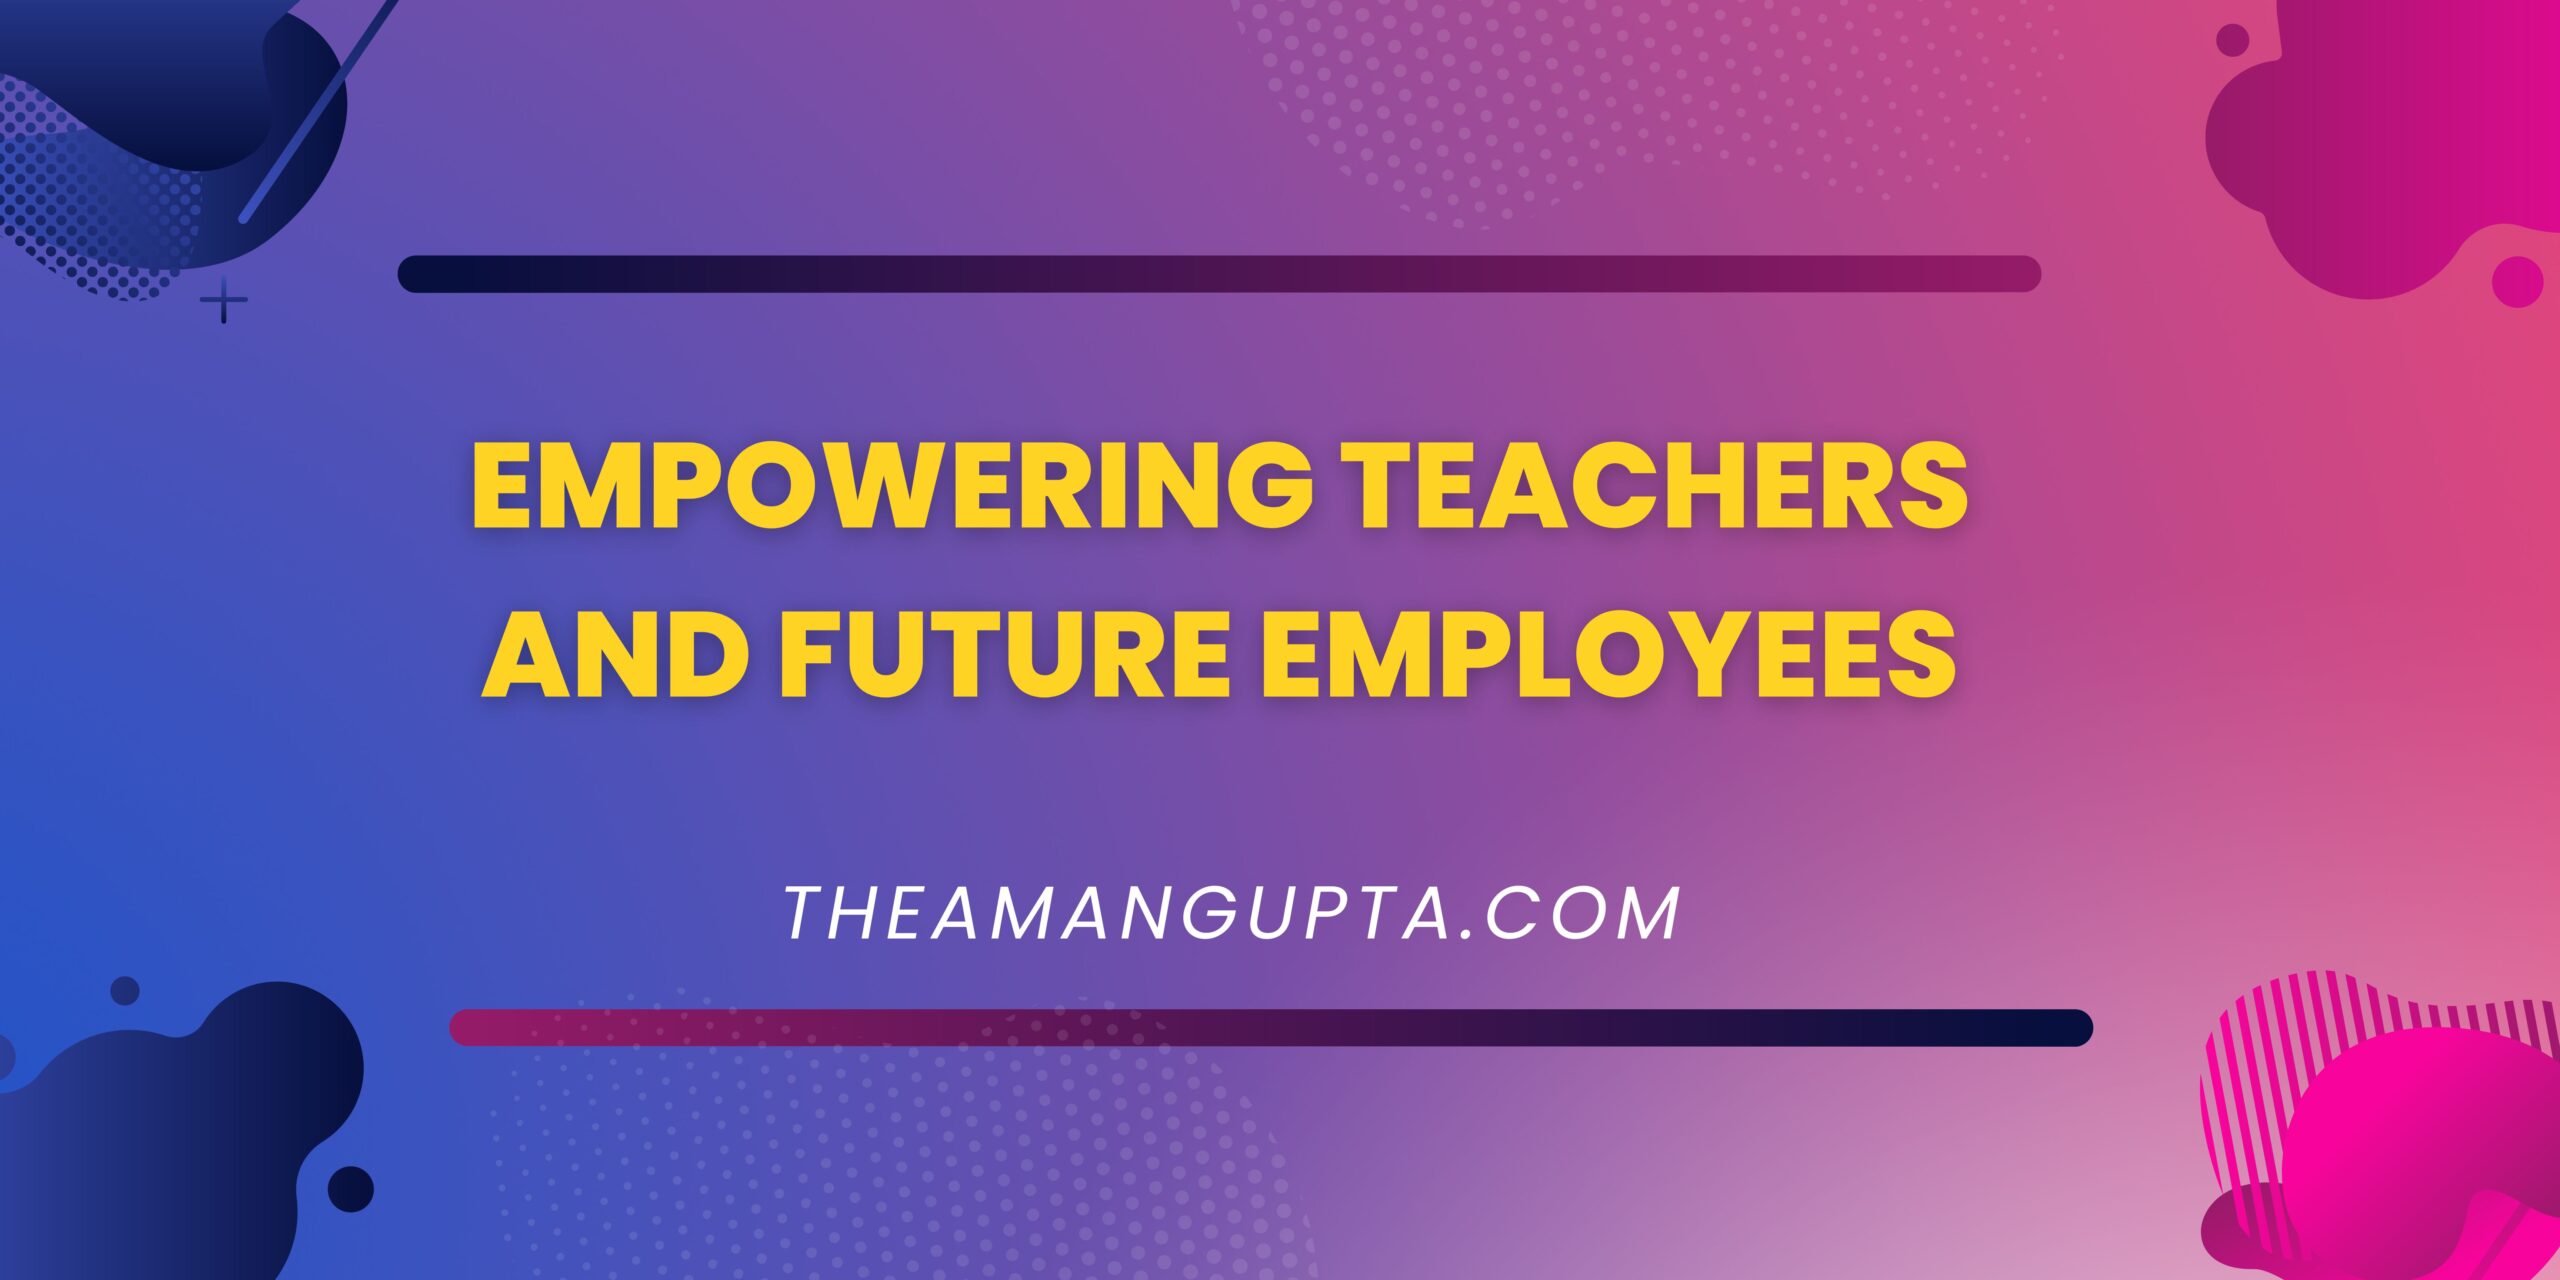 Empowering Teachers And Future Employees|Future Employees|Theamangupta|Theamangupta